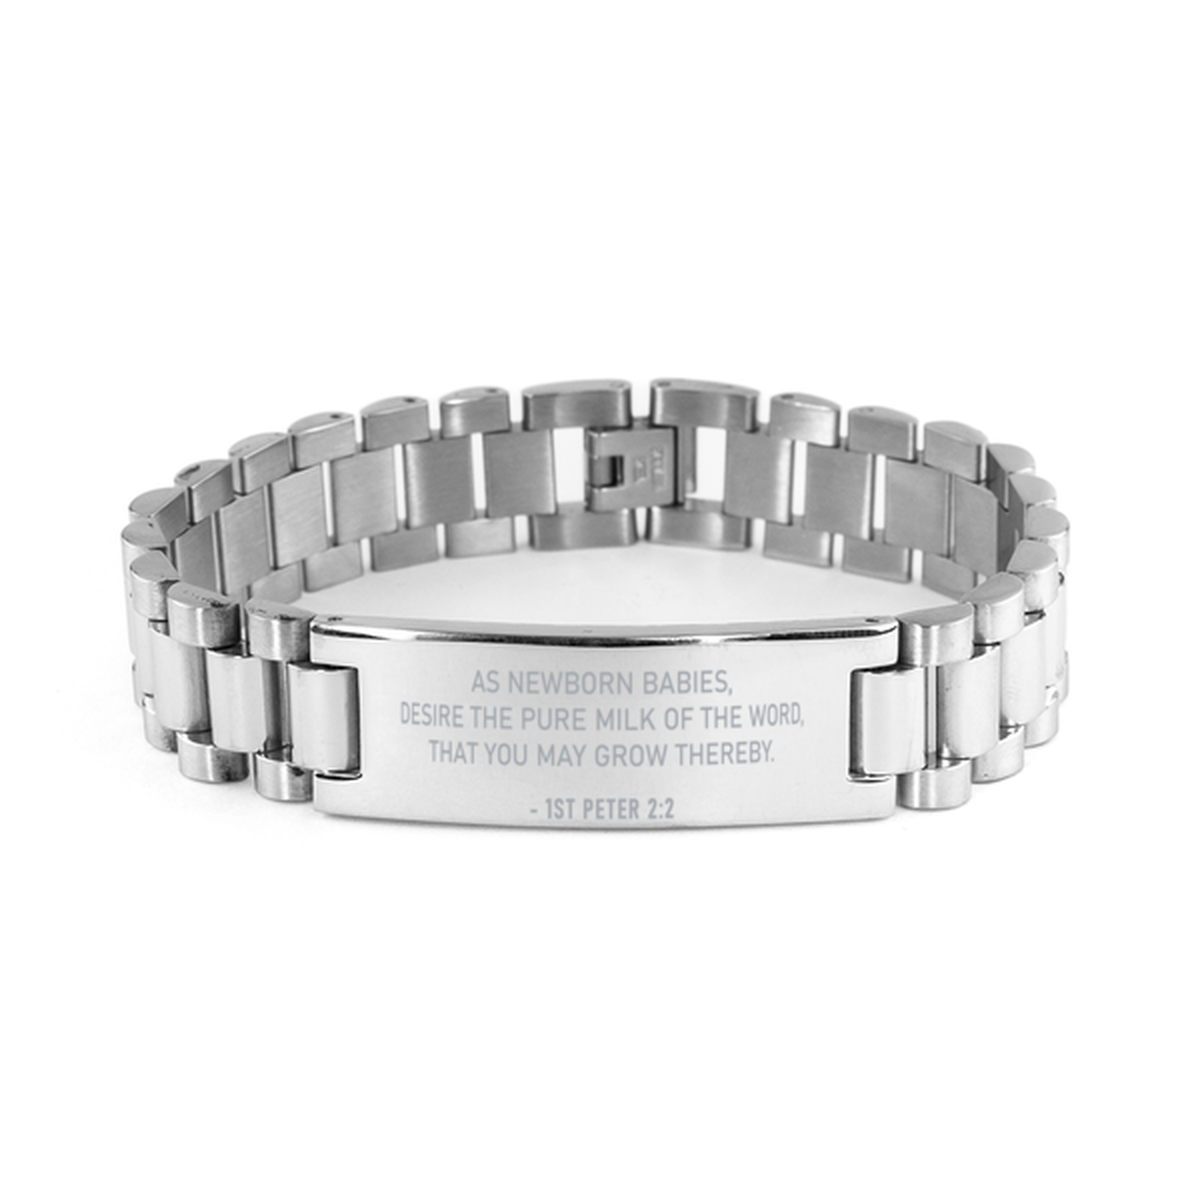 Christian Ladder Stainless Steel Bracelet, 1St Peter 2:2 As Newborn Babes, Desire The Pure Milk Of The, Motivational Bible Verse Gifts For Men Women